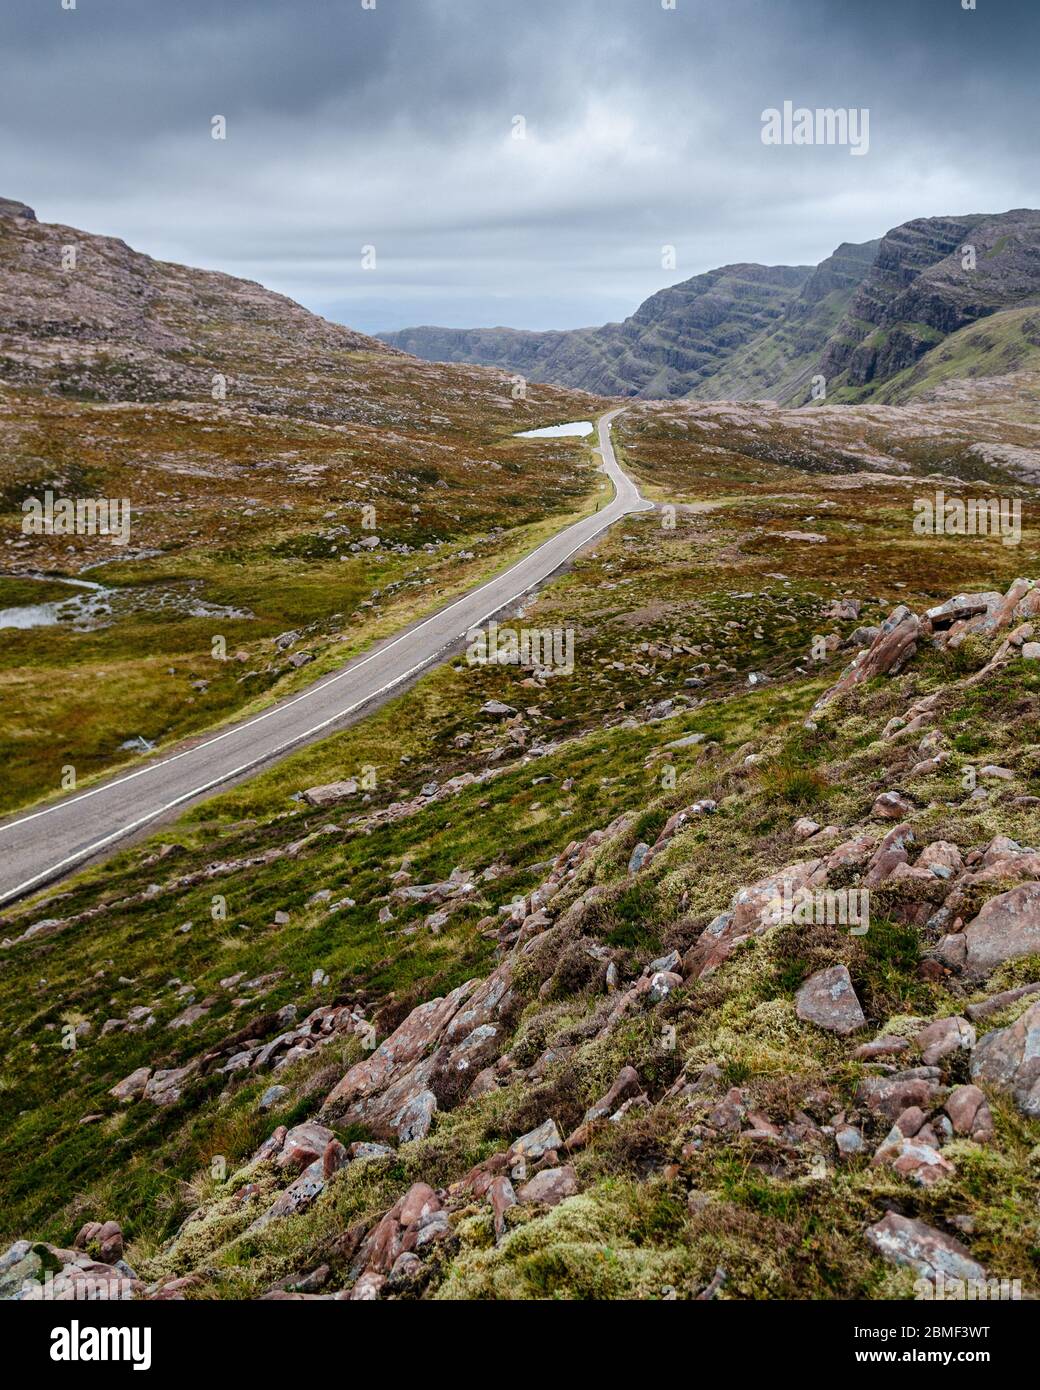 The Bealach na Ba mountain pass road crosses moorland at its summit between Meall Gorm and Beinn Bhan mountains in Wester Ross in the Highlands of Sco Stock Photo